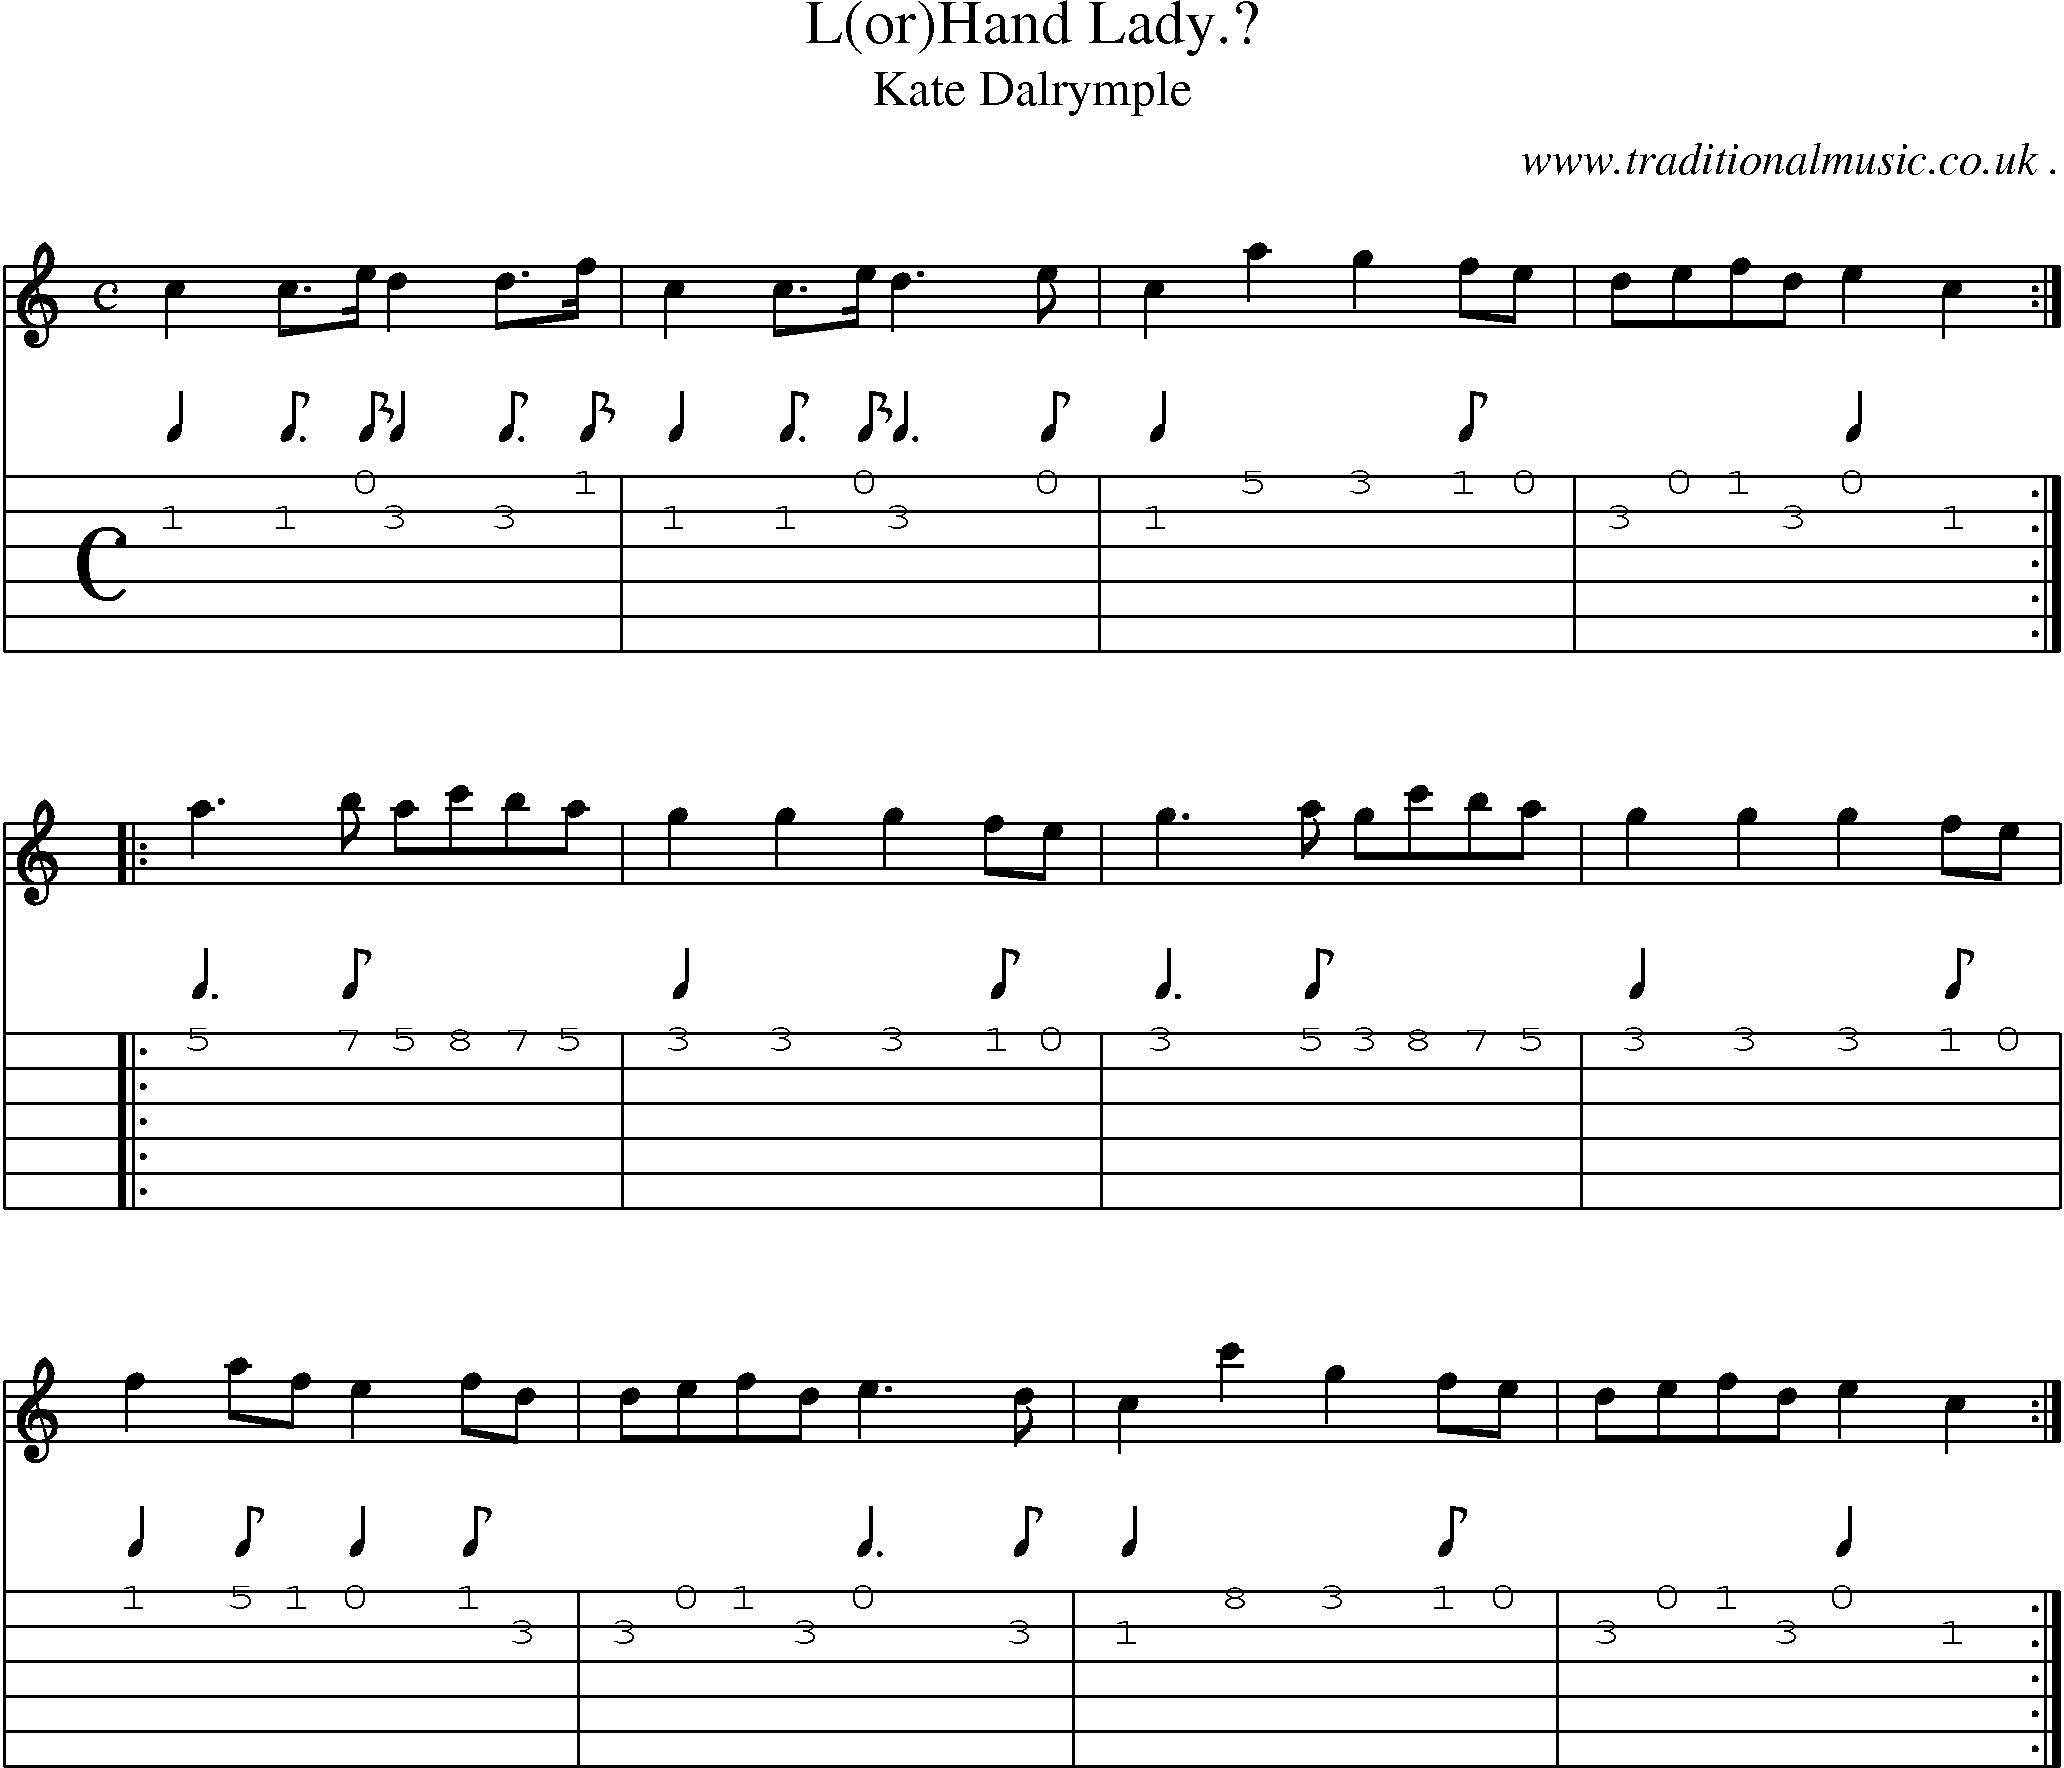 Sheet-Music and Guitar Tabs for L(or)hand Lady